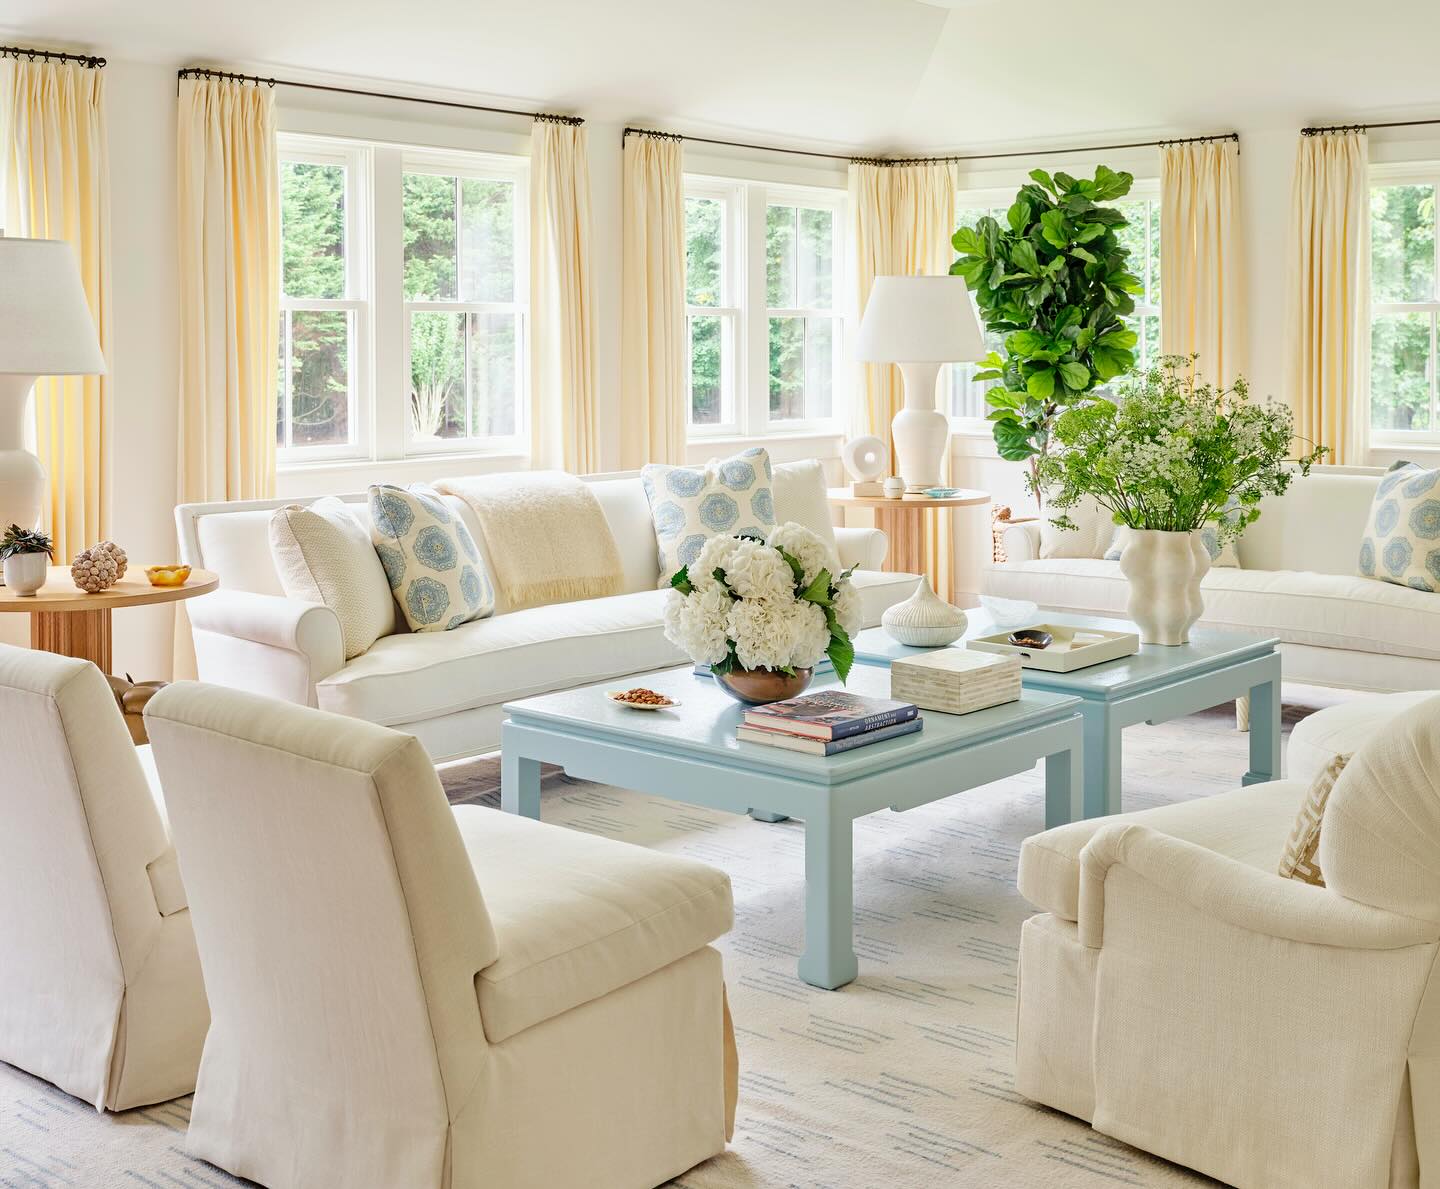 timeless vs. trendy decor living room with coastal style elements featured in "Timeless vs. Trendy Decor" 